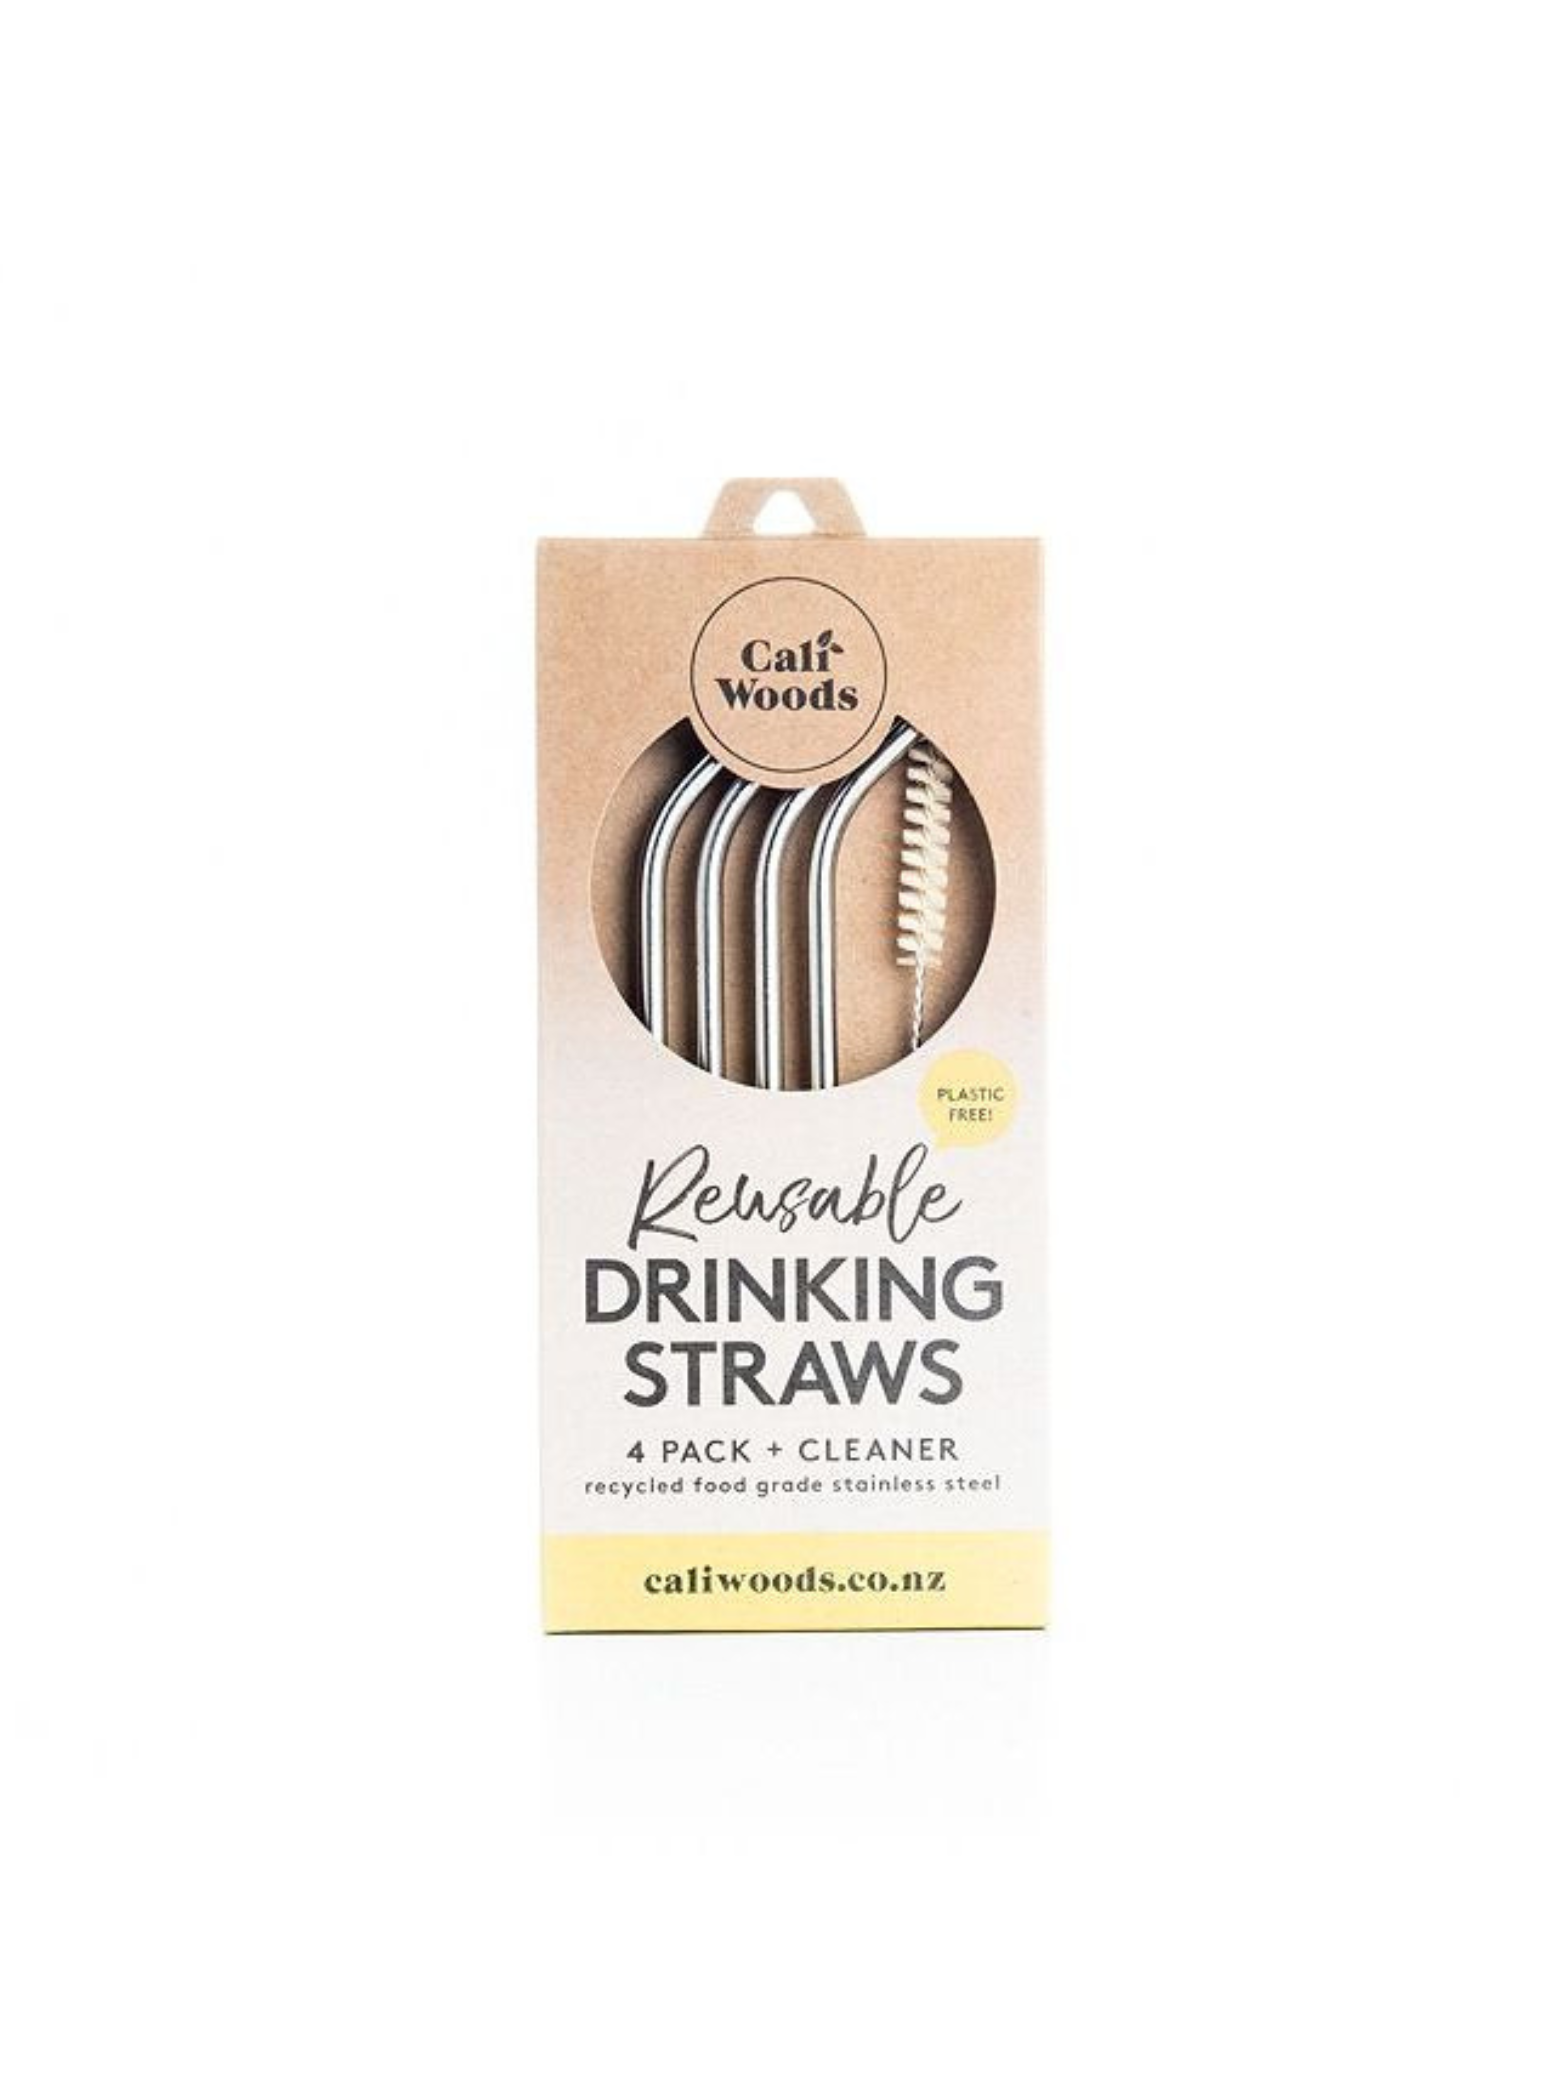 Caliwoods Stainless Steel Straws